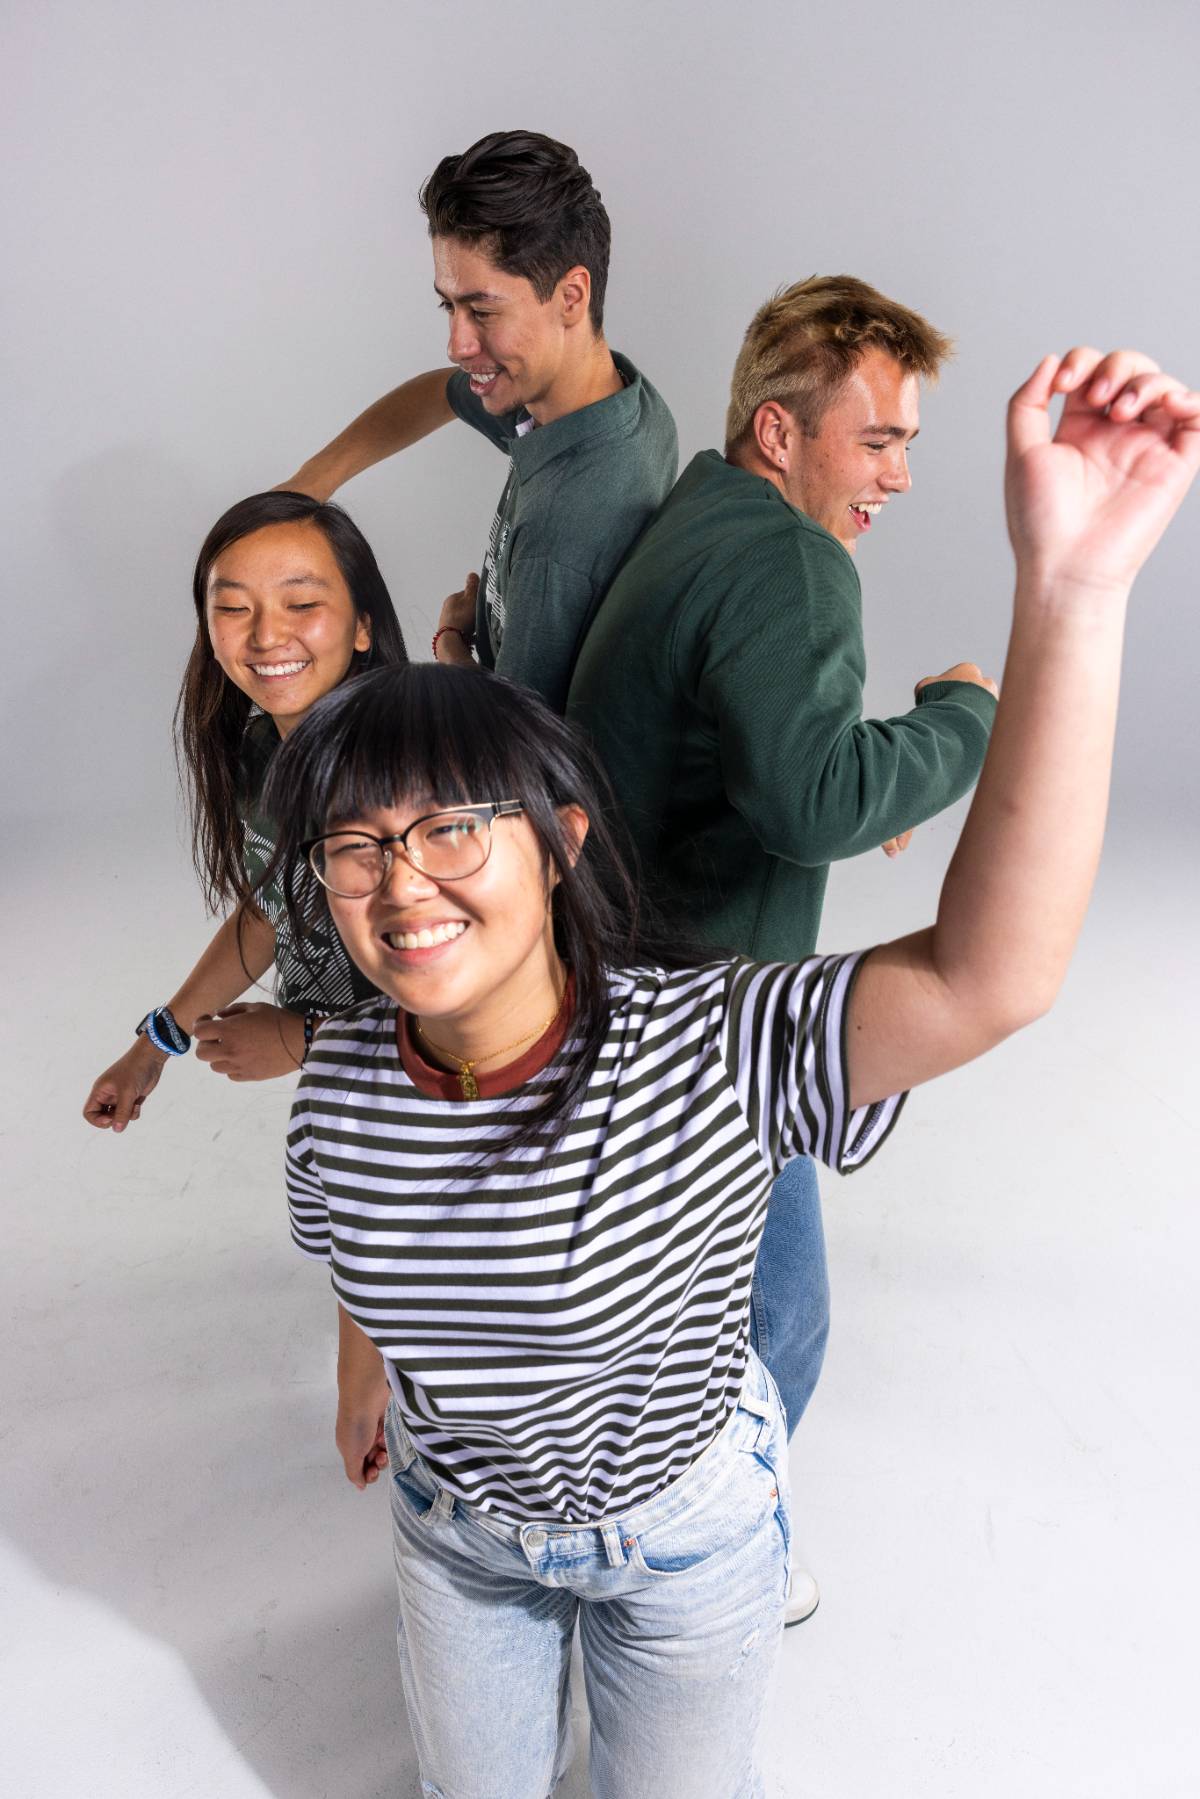 Image of high school students during a photoshoot